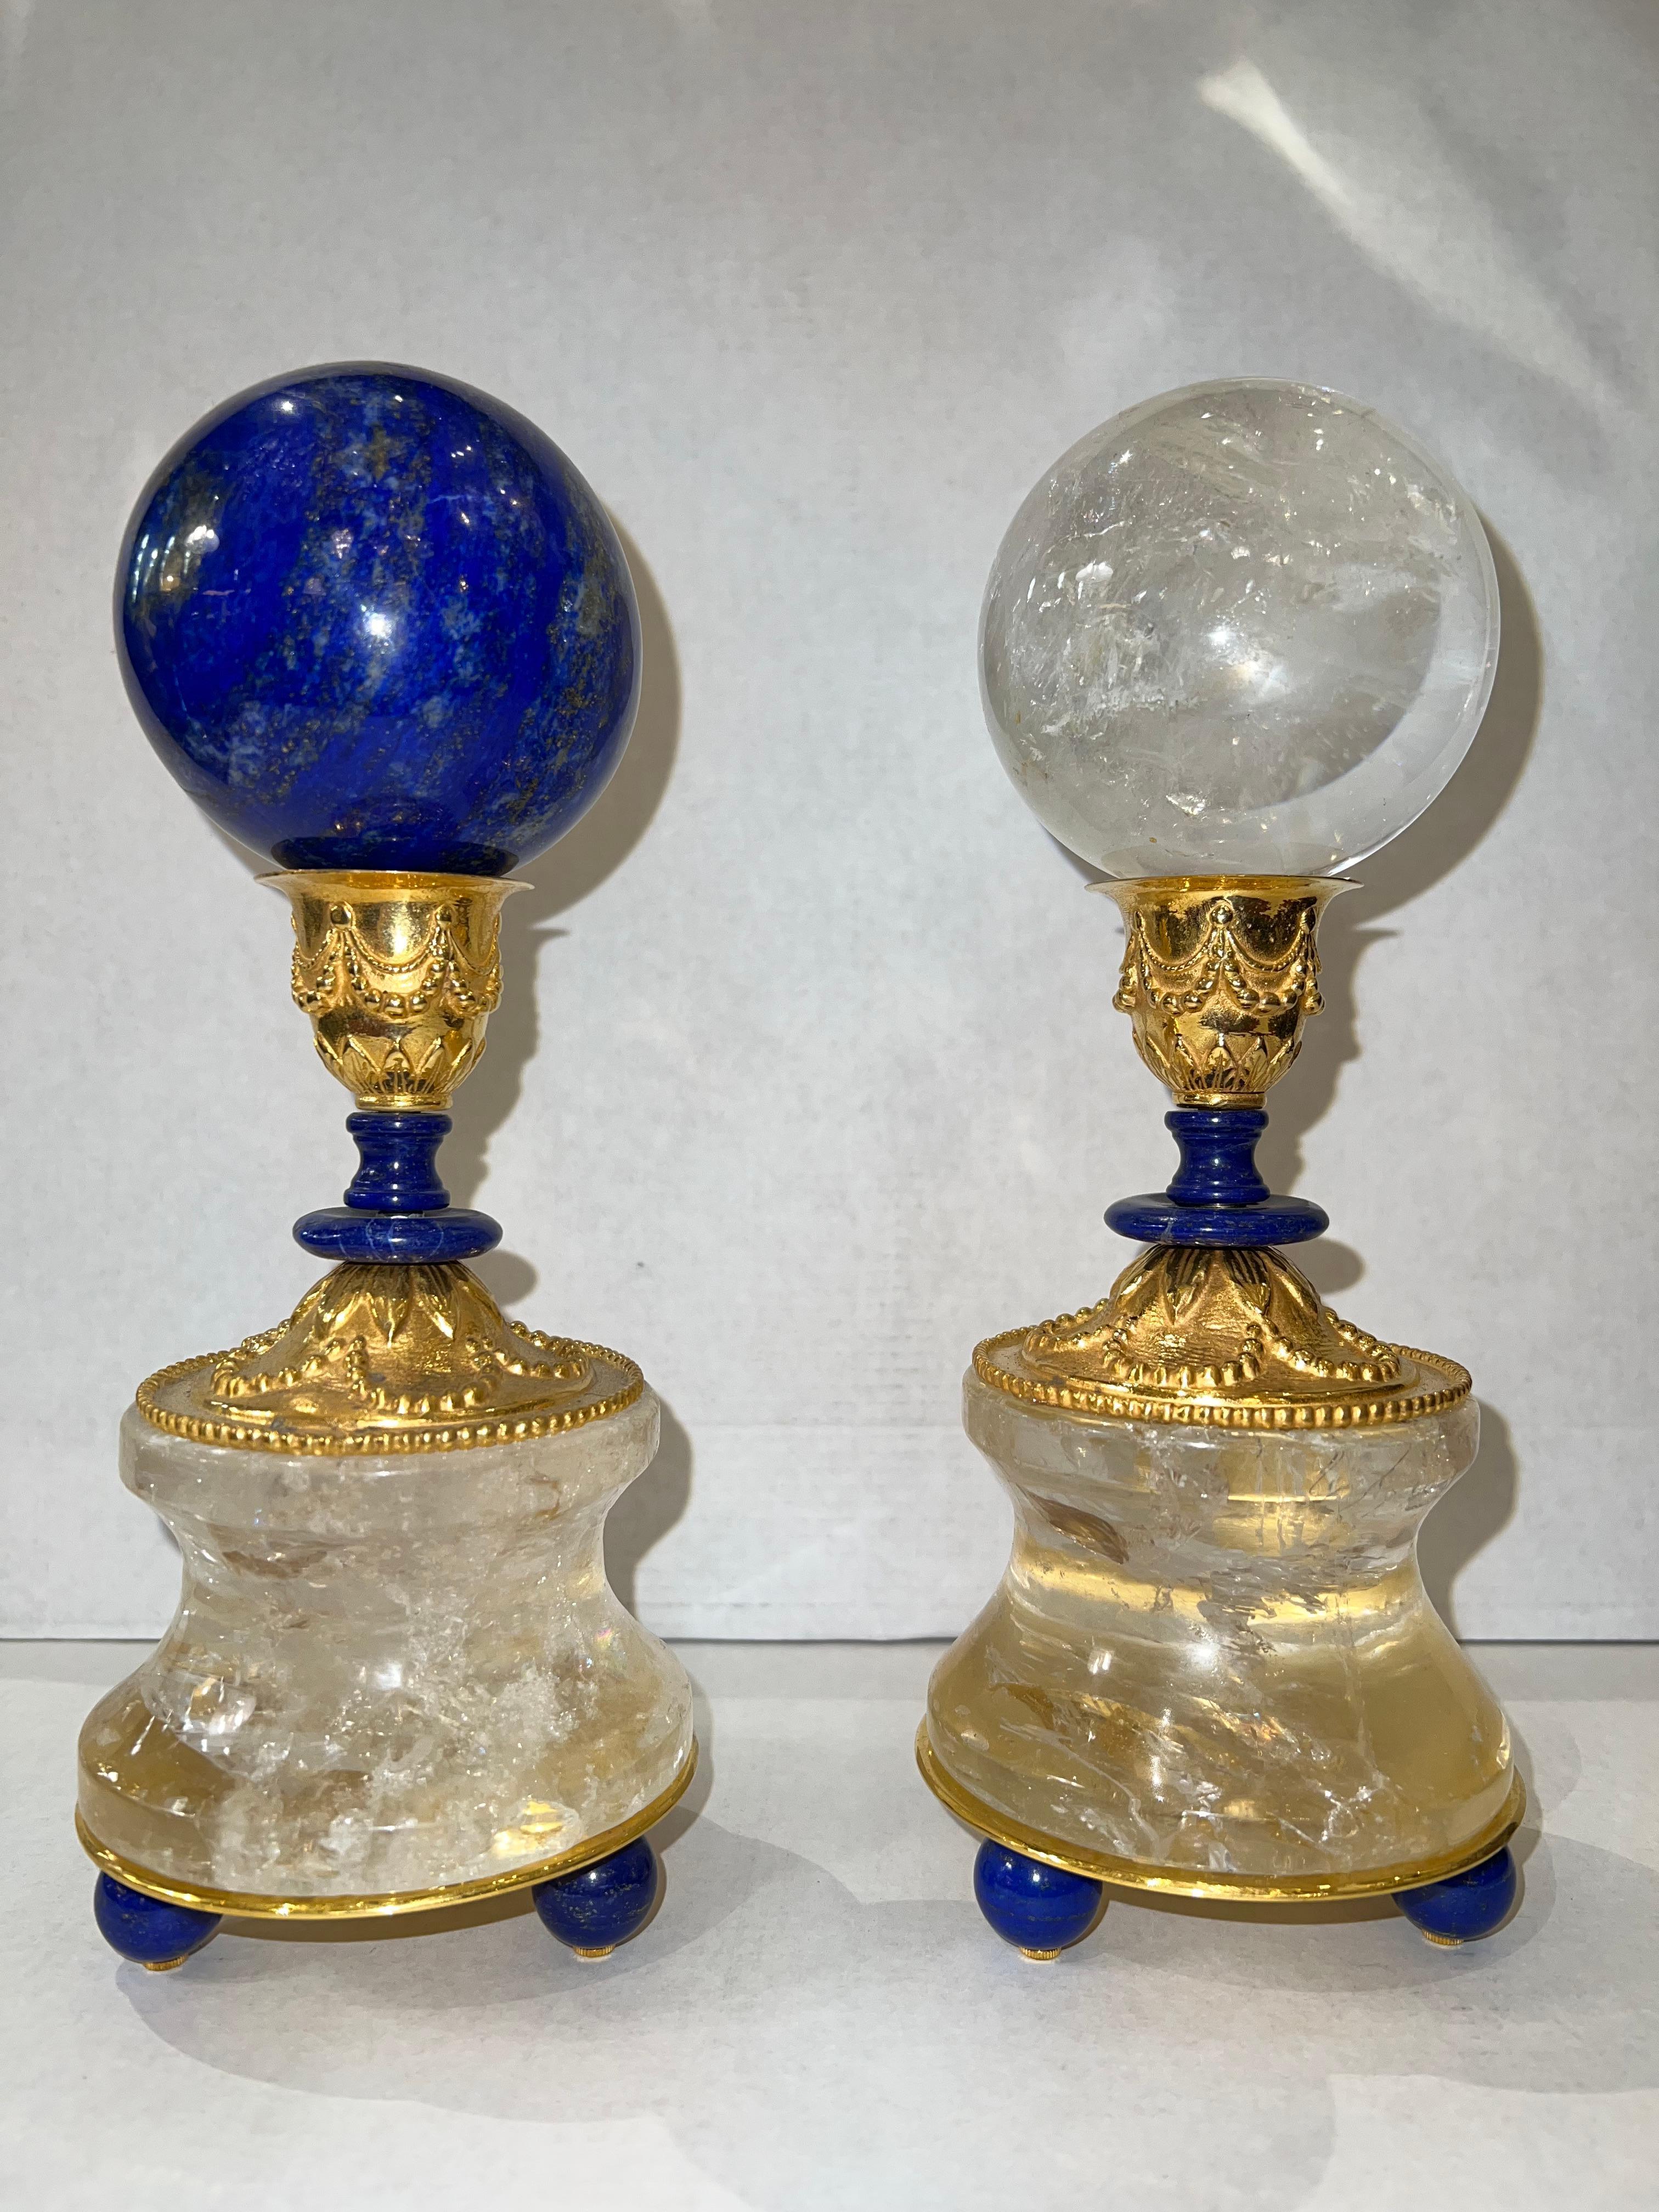 Amazing pair of rock crystal and 24 k gold-plated bronze louis the XVITH style support of a rock crystal and lapis lazuli spheres.(74 mm)
Made in PARIS.
Unique.